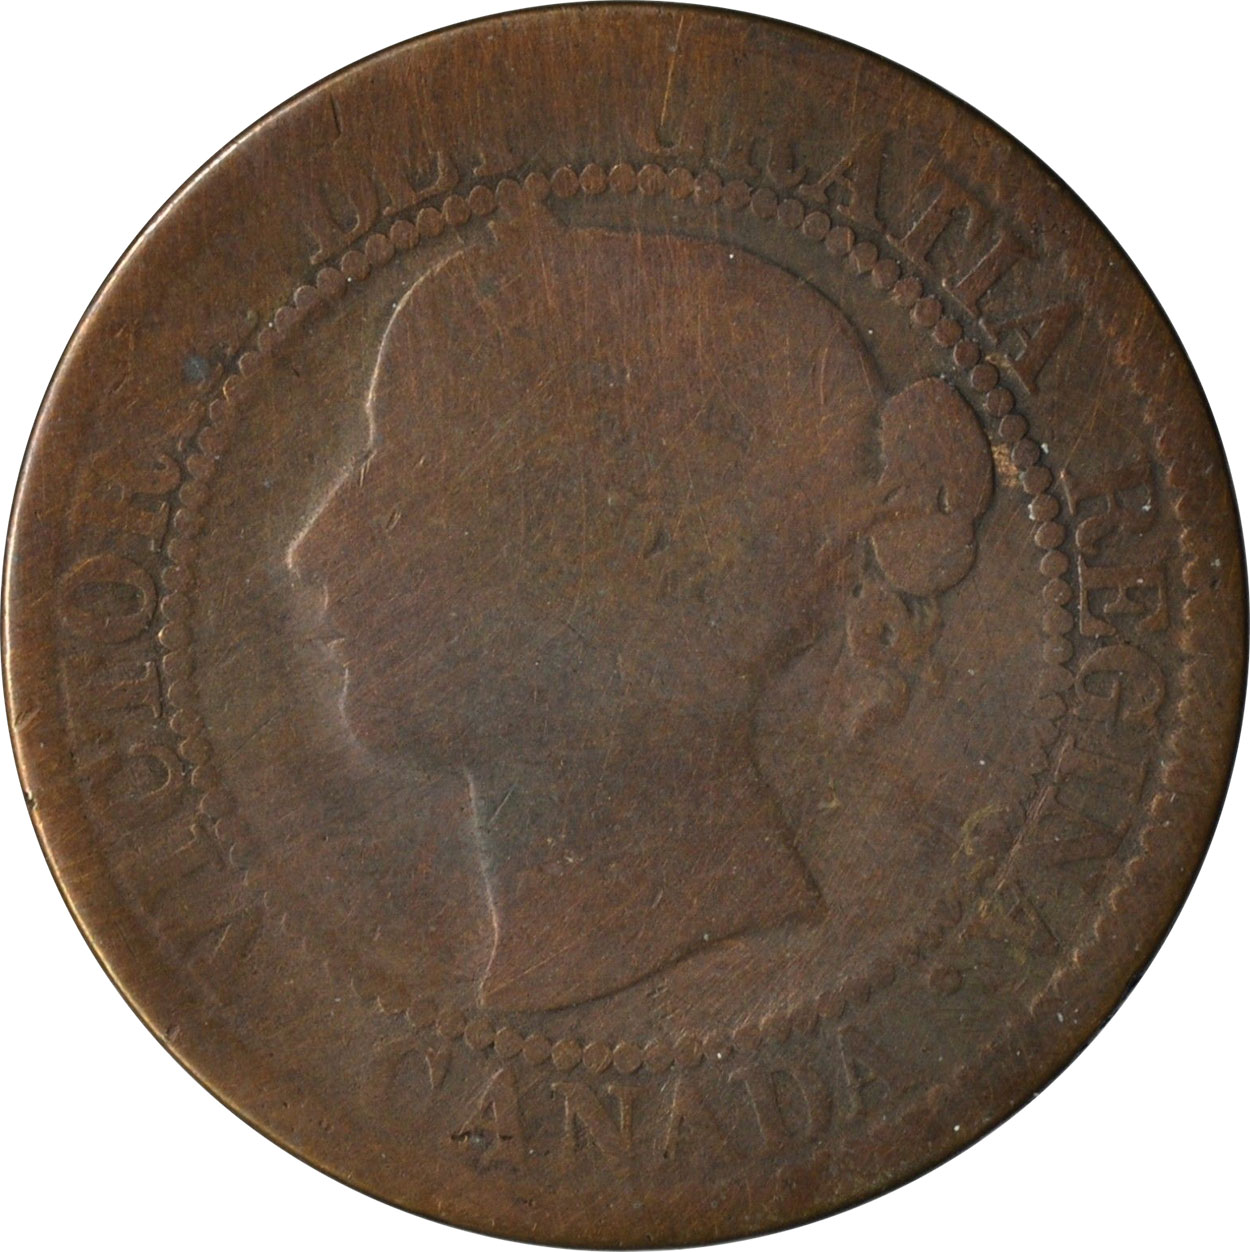 AG-3 - 1 cent 1858 and 1859 - Victoria